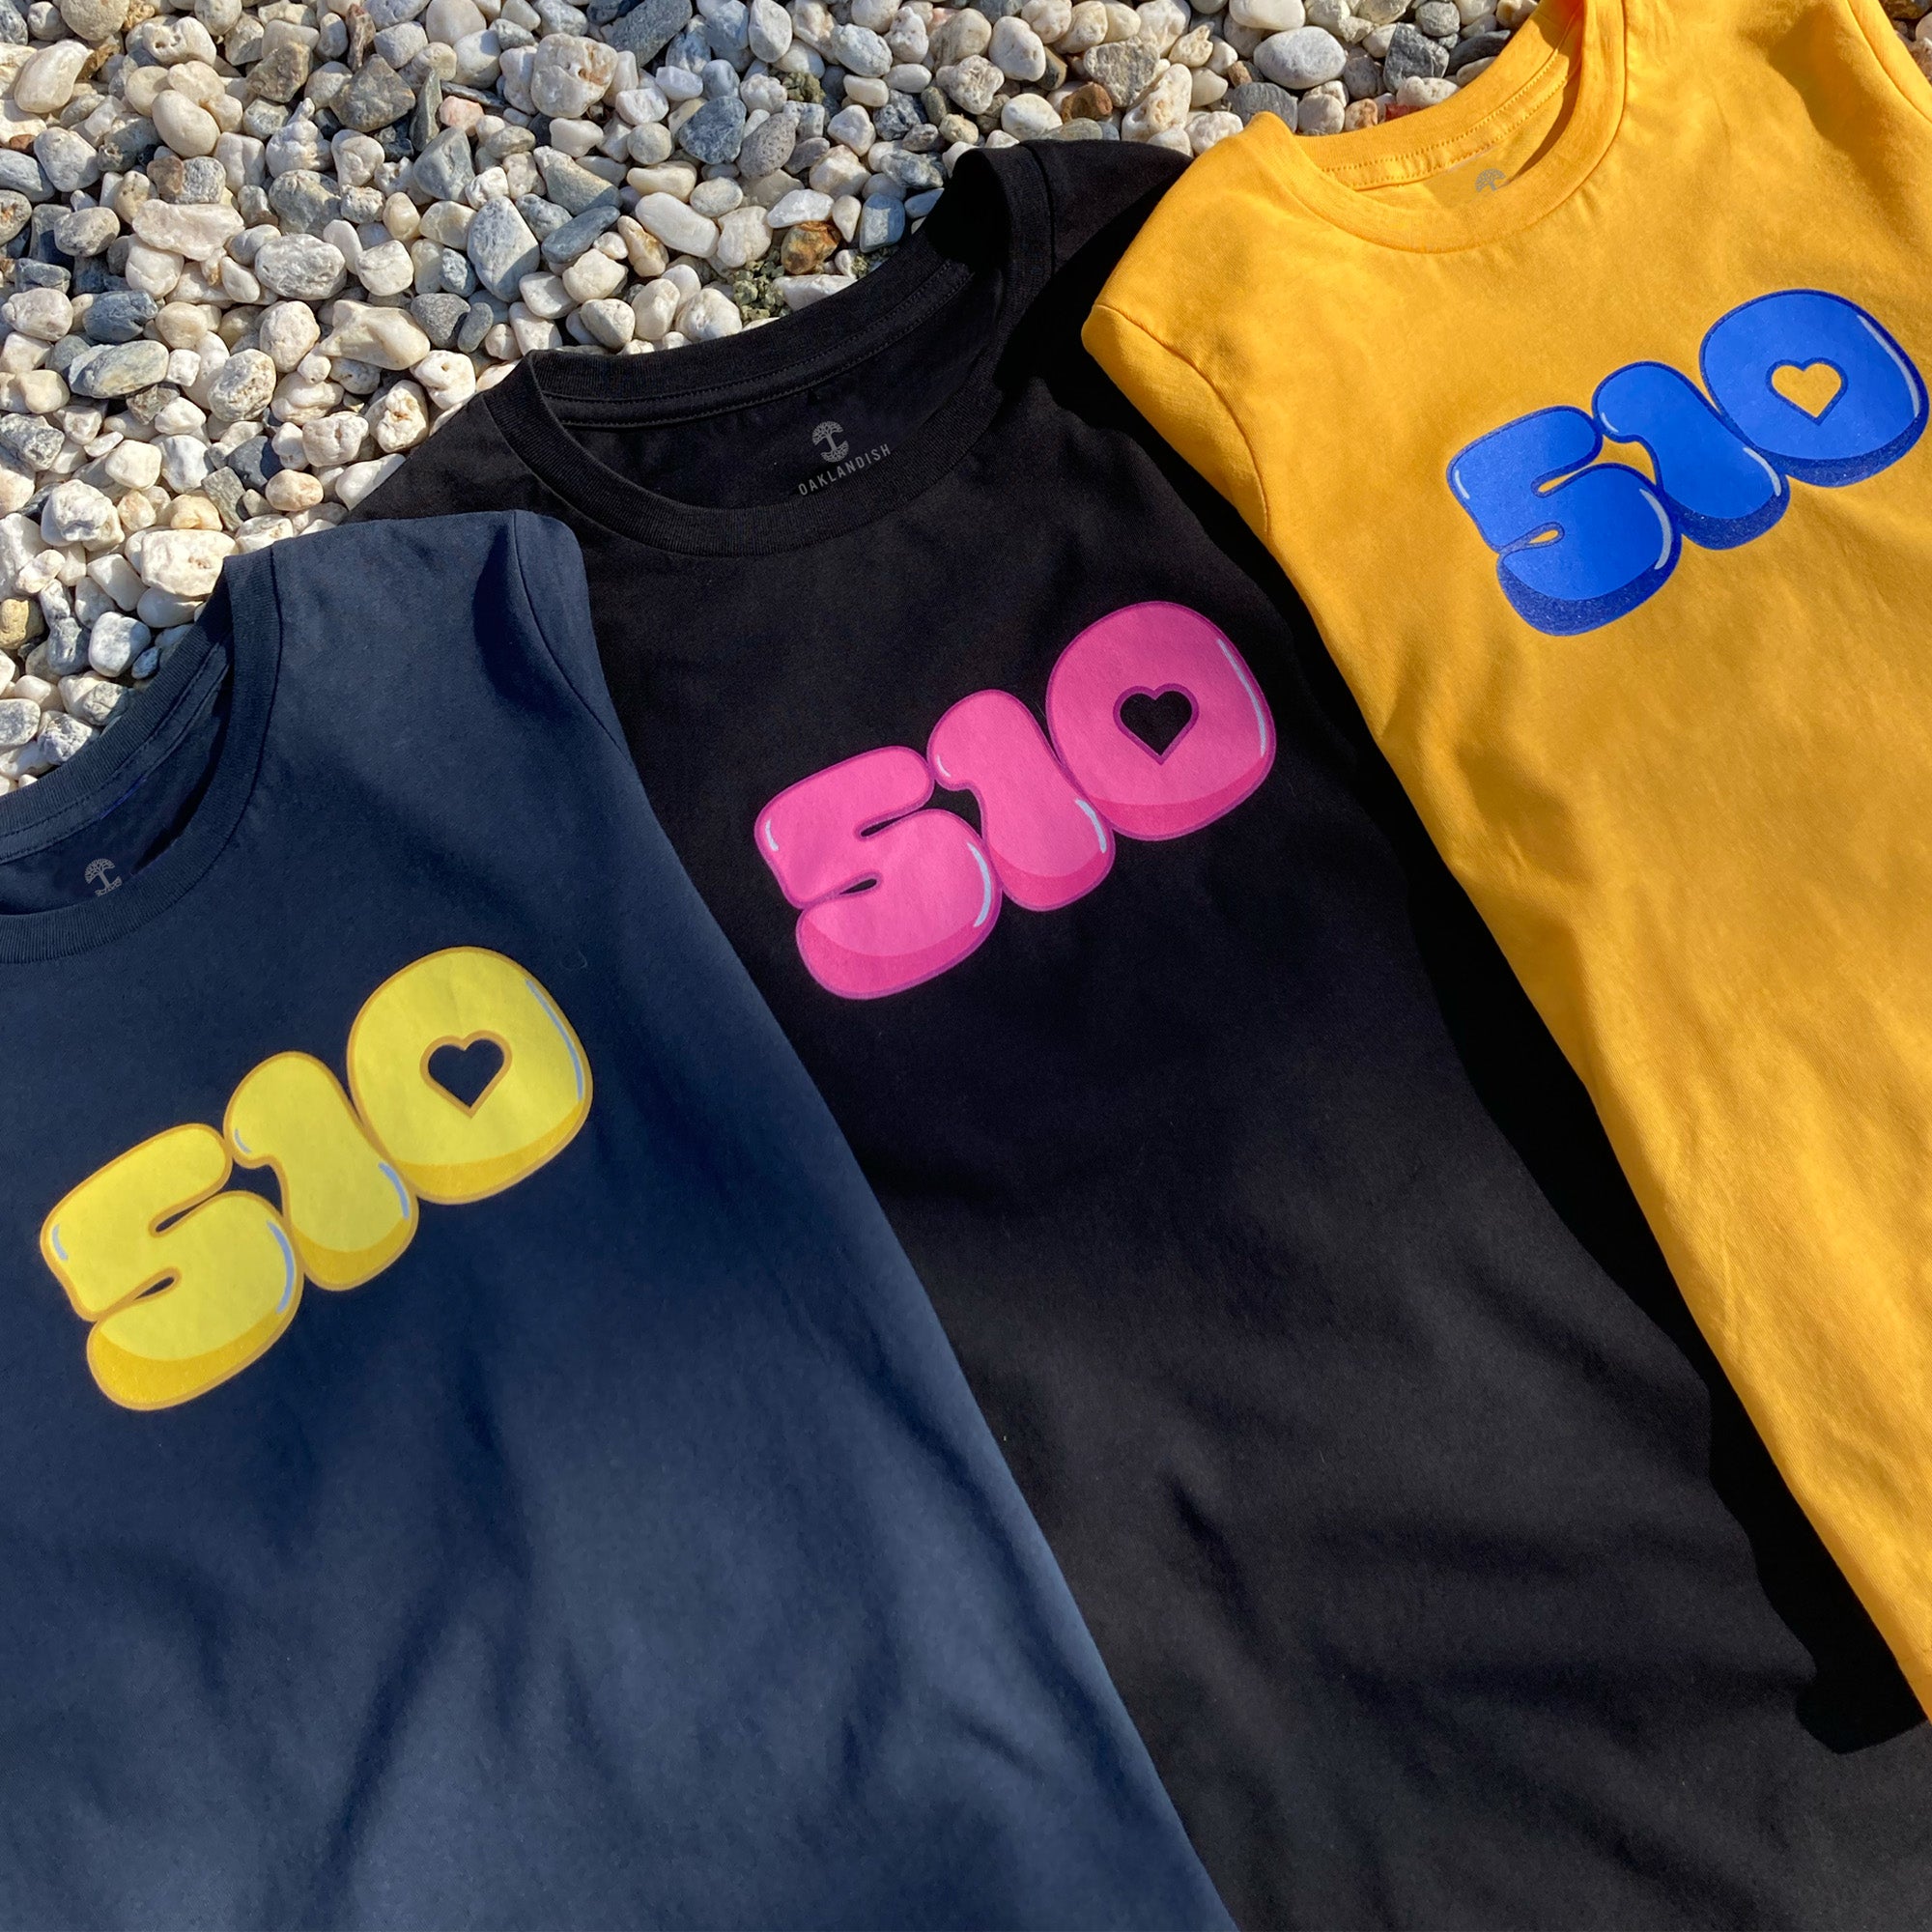 Group photo of the two colors of toddler 510 bubble tees (navy and yellow) and a black women’s cut 510 bubble tee lying outside on pebbles.